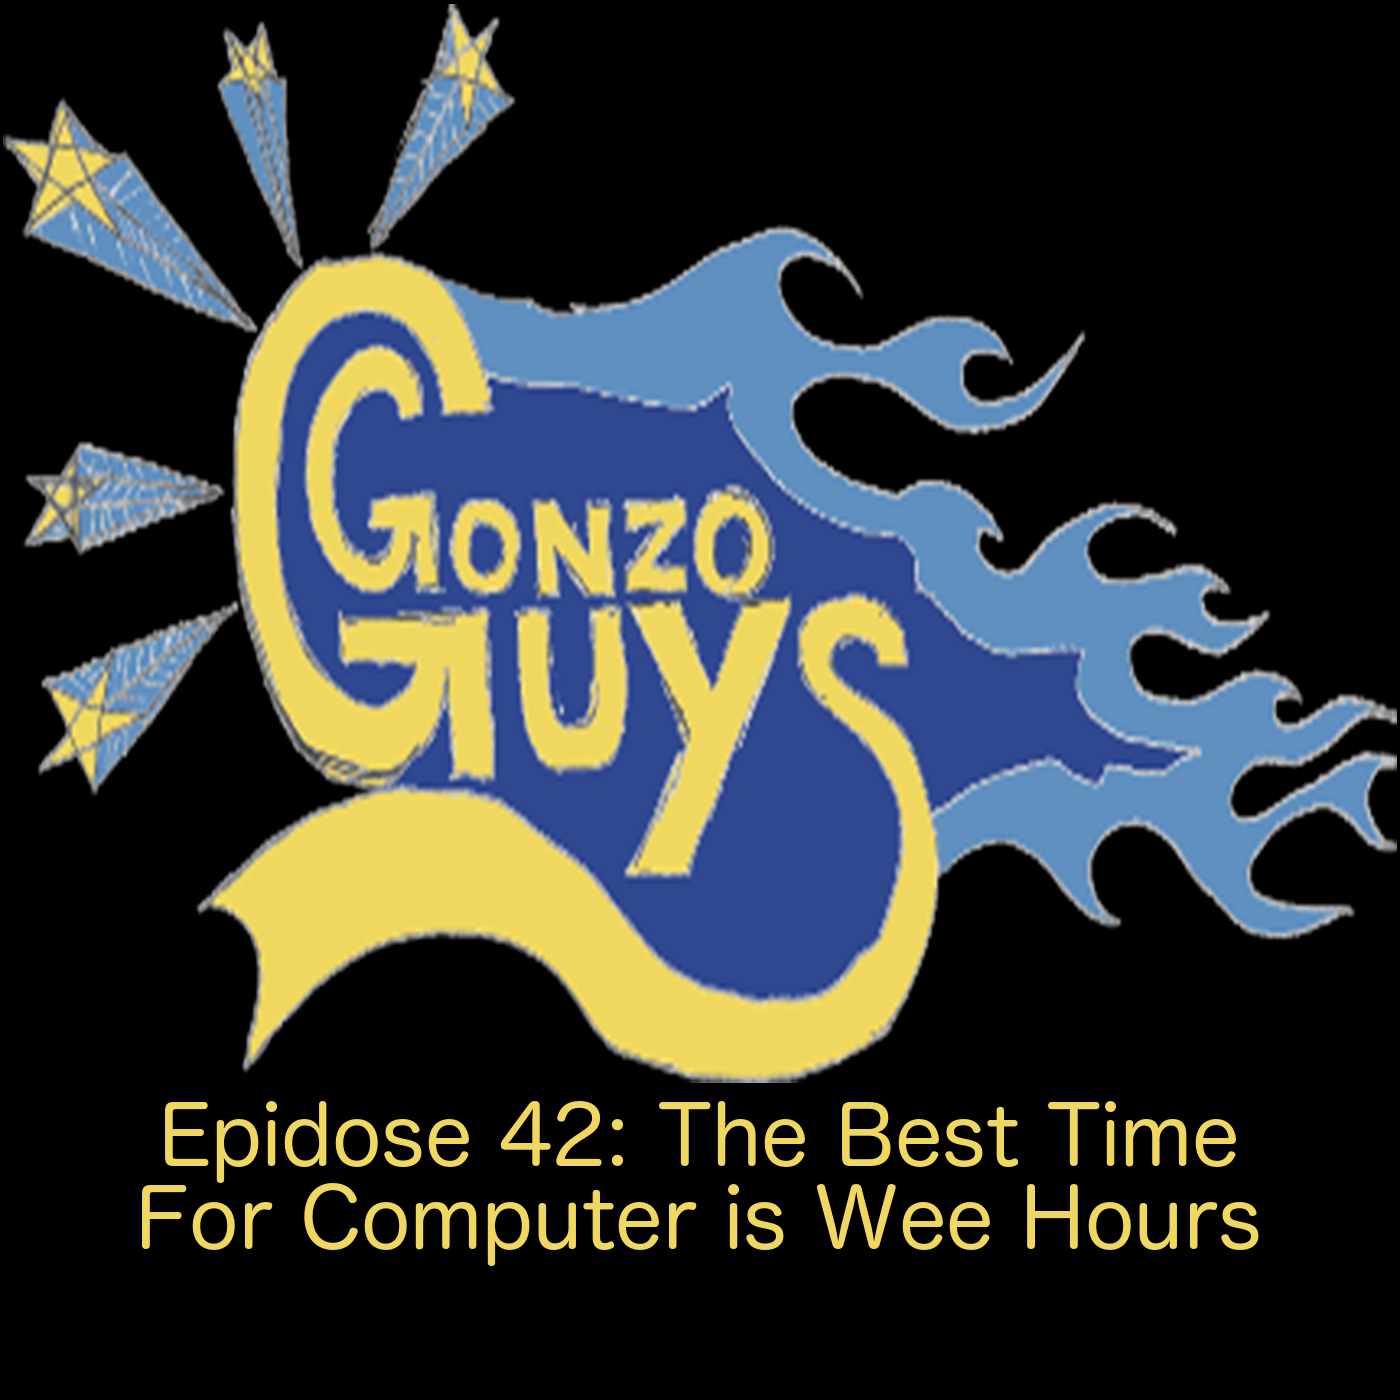 Gonzo Guys Podcast Epidose 42: Best Time For Computer Is Wee Hours